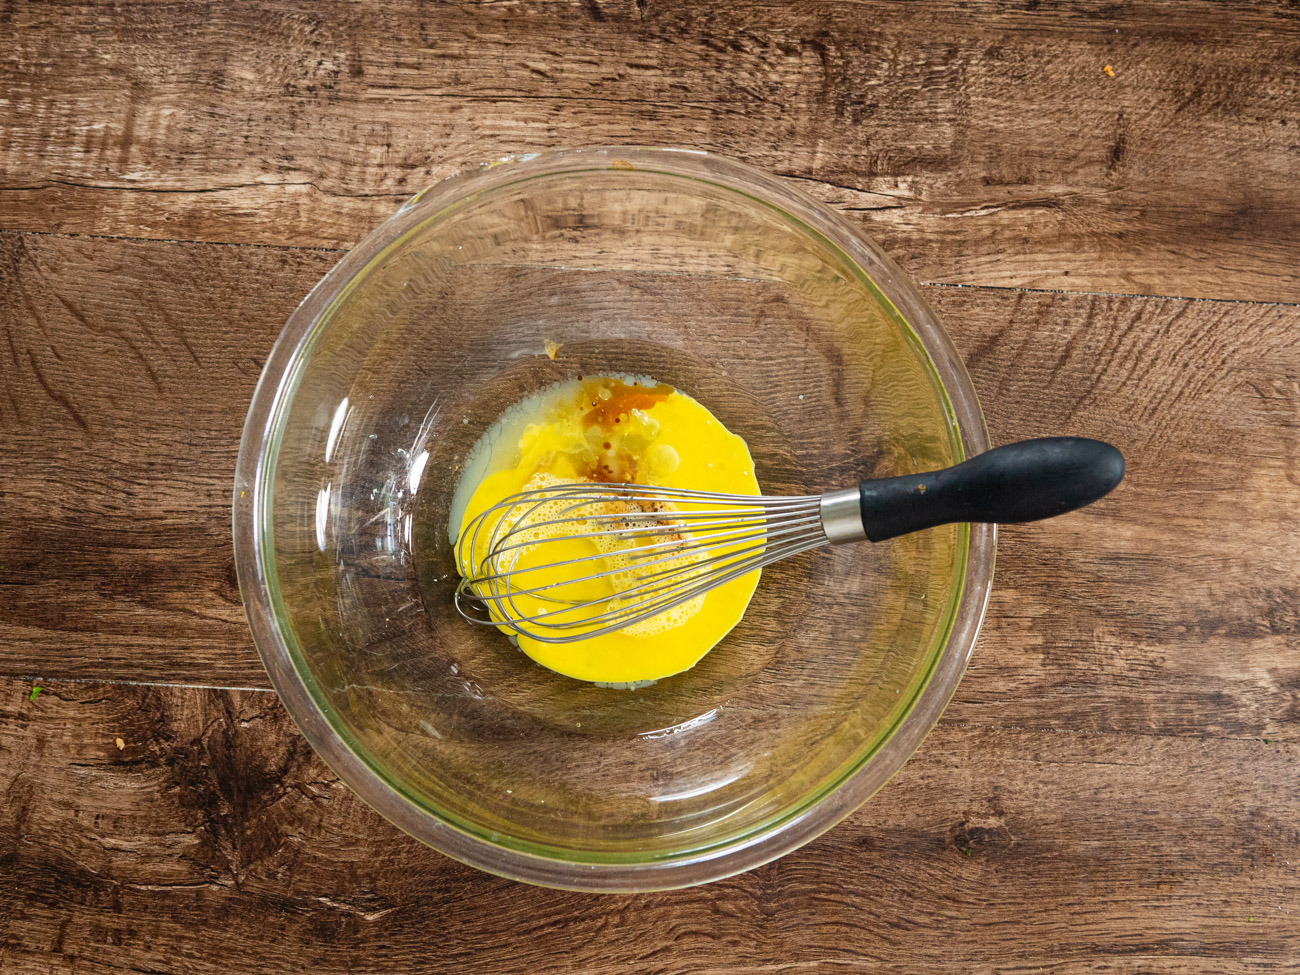 In a large bowl, mix together oil, eggs, lemon juice, coconut extract, and vanilla extract.